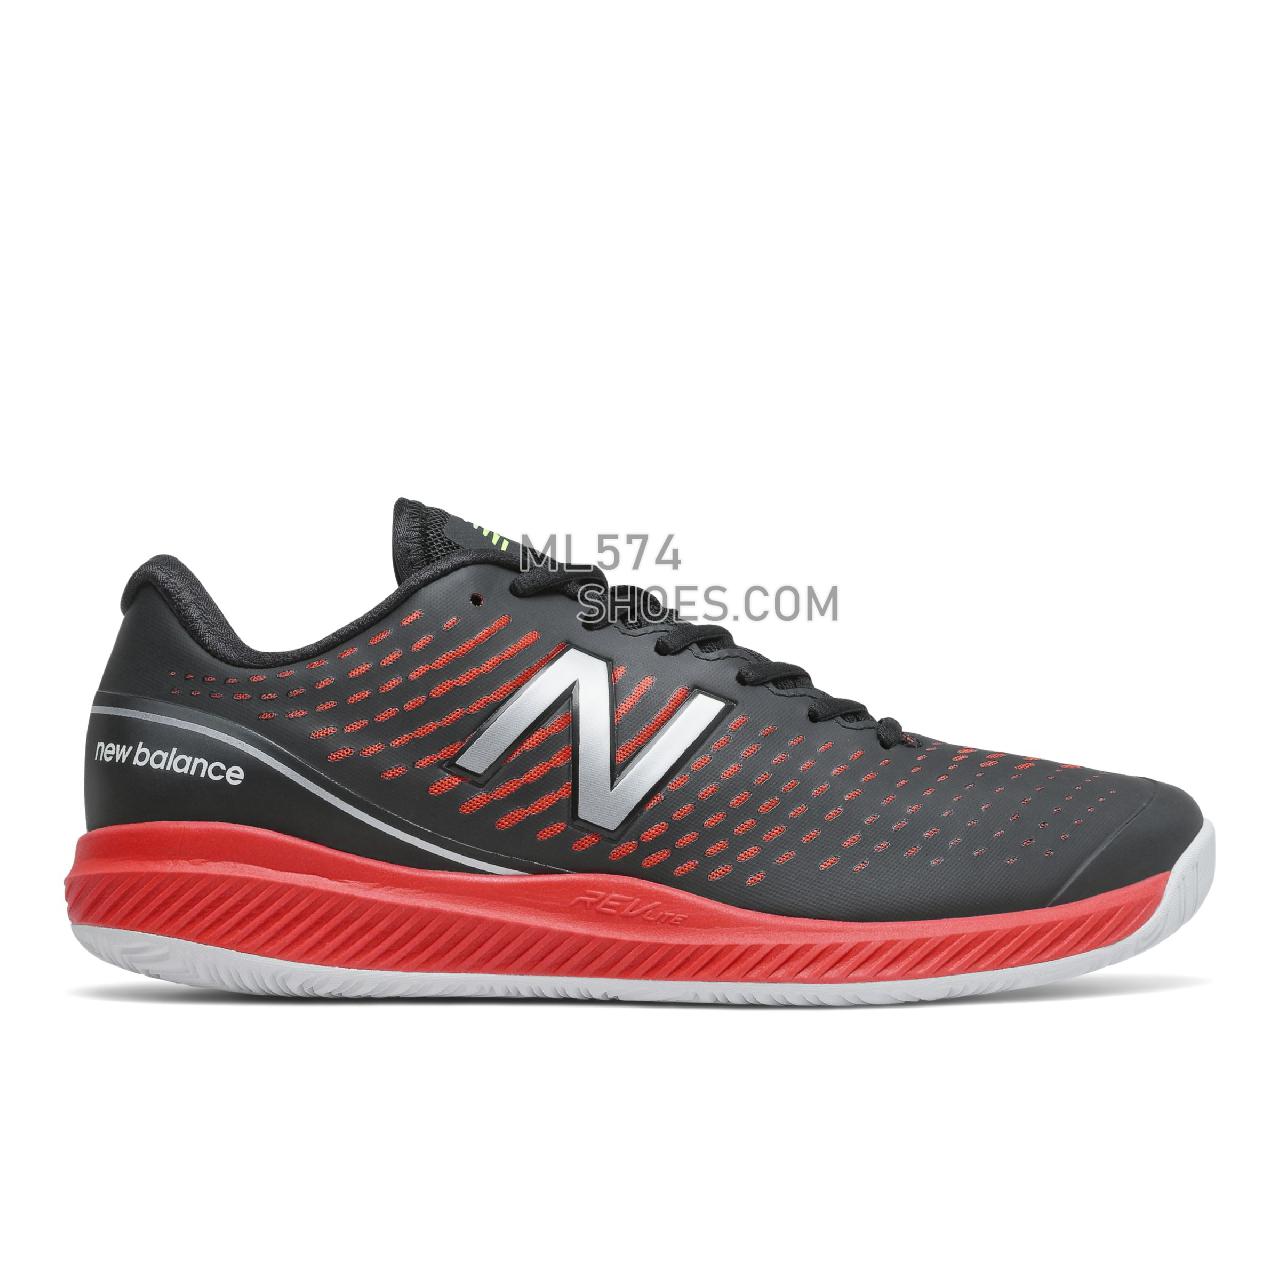 New Balance 796v2 - Men's Classic Sneakers - Black with Velocity Red and Bleached Lime Glo - MCH796B2